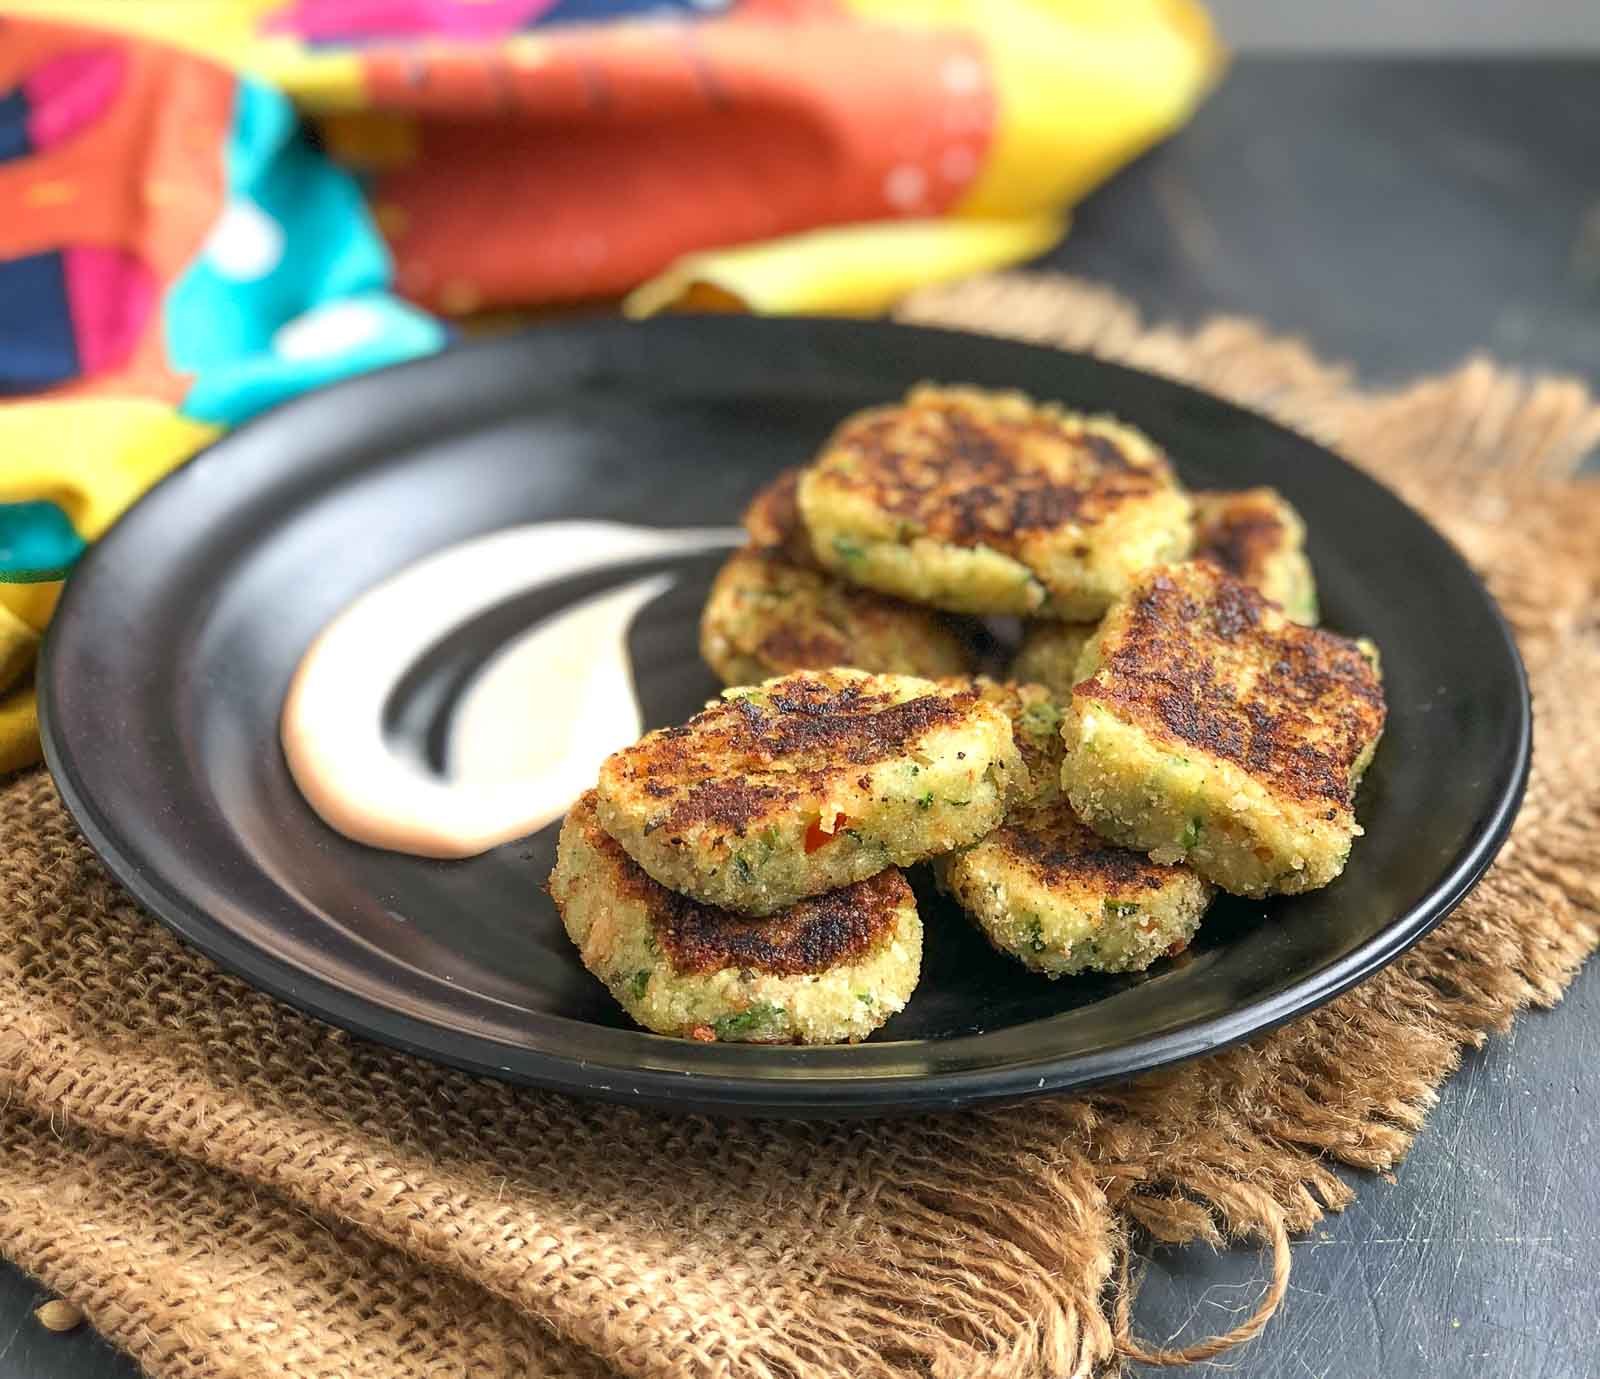 Zucchini Tater Tots Recipe - A Delicious Party Appetizer